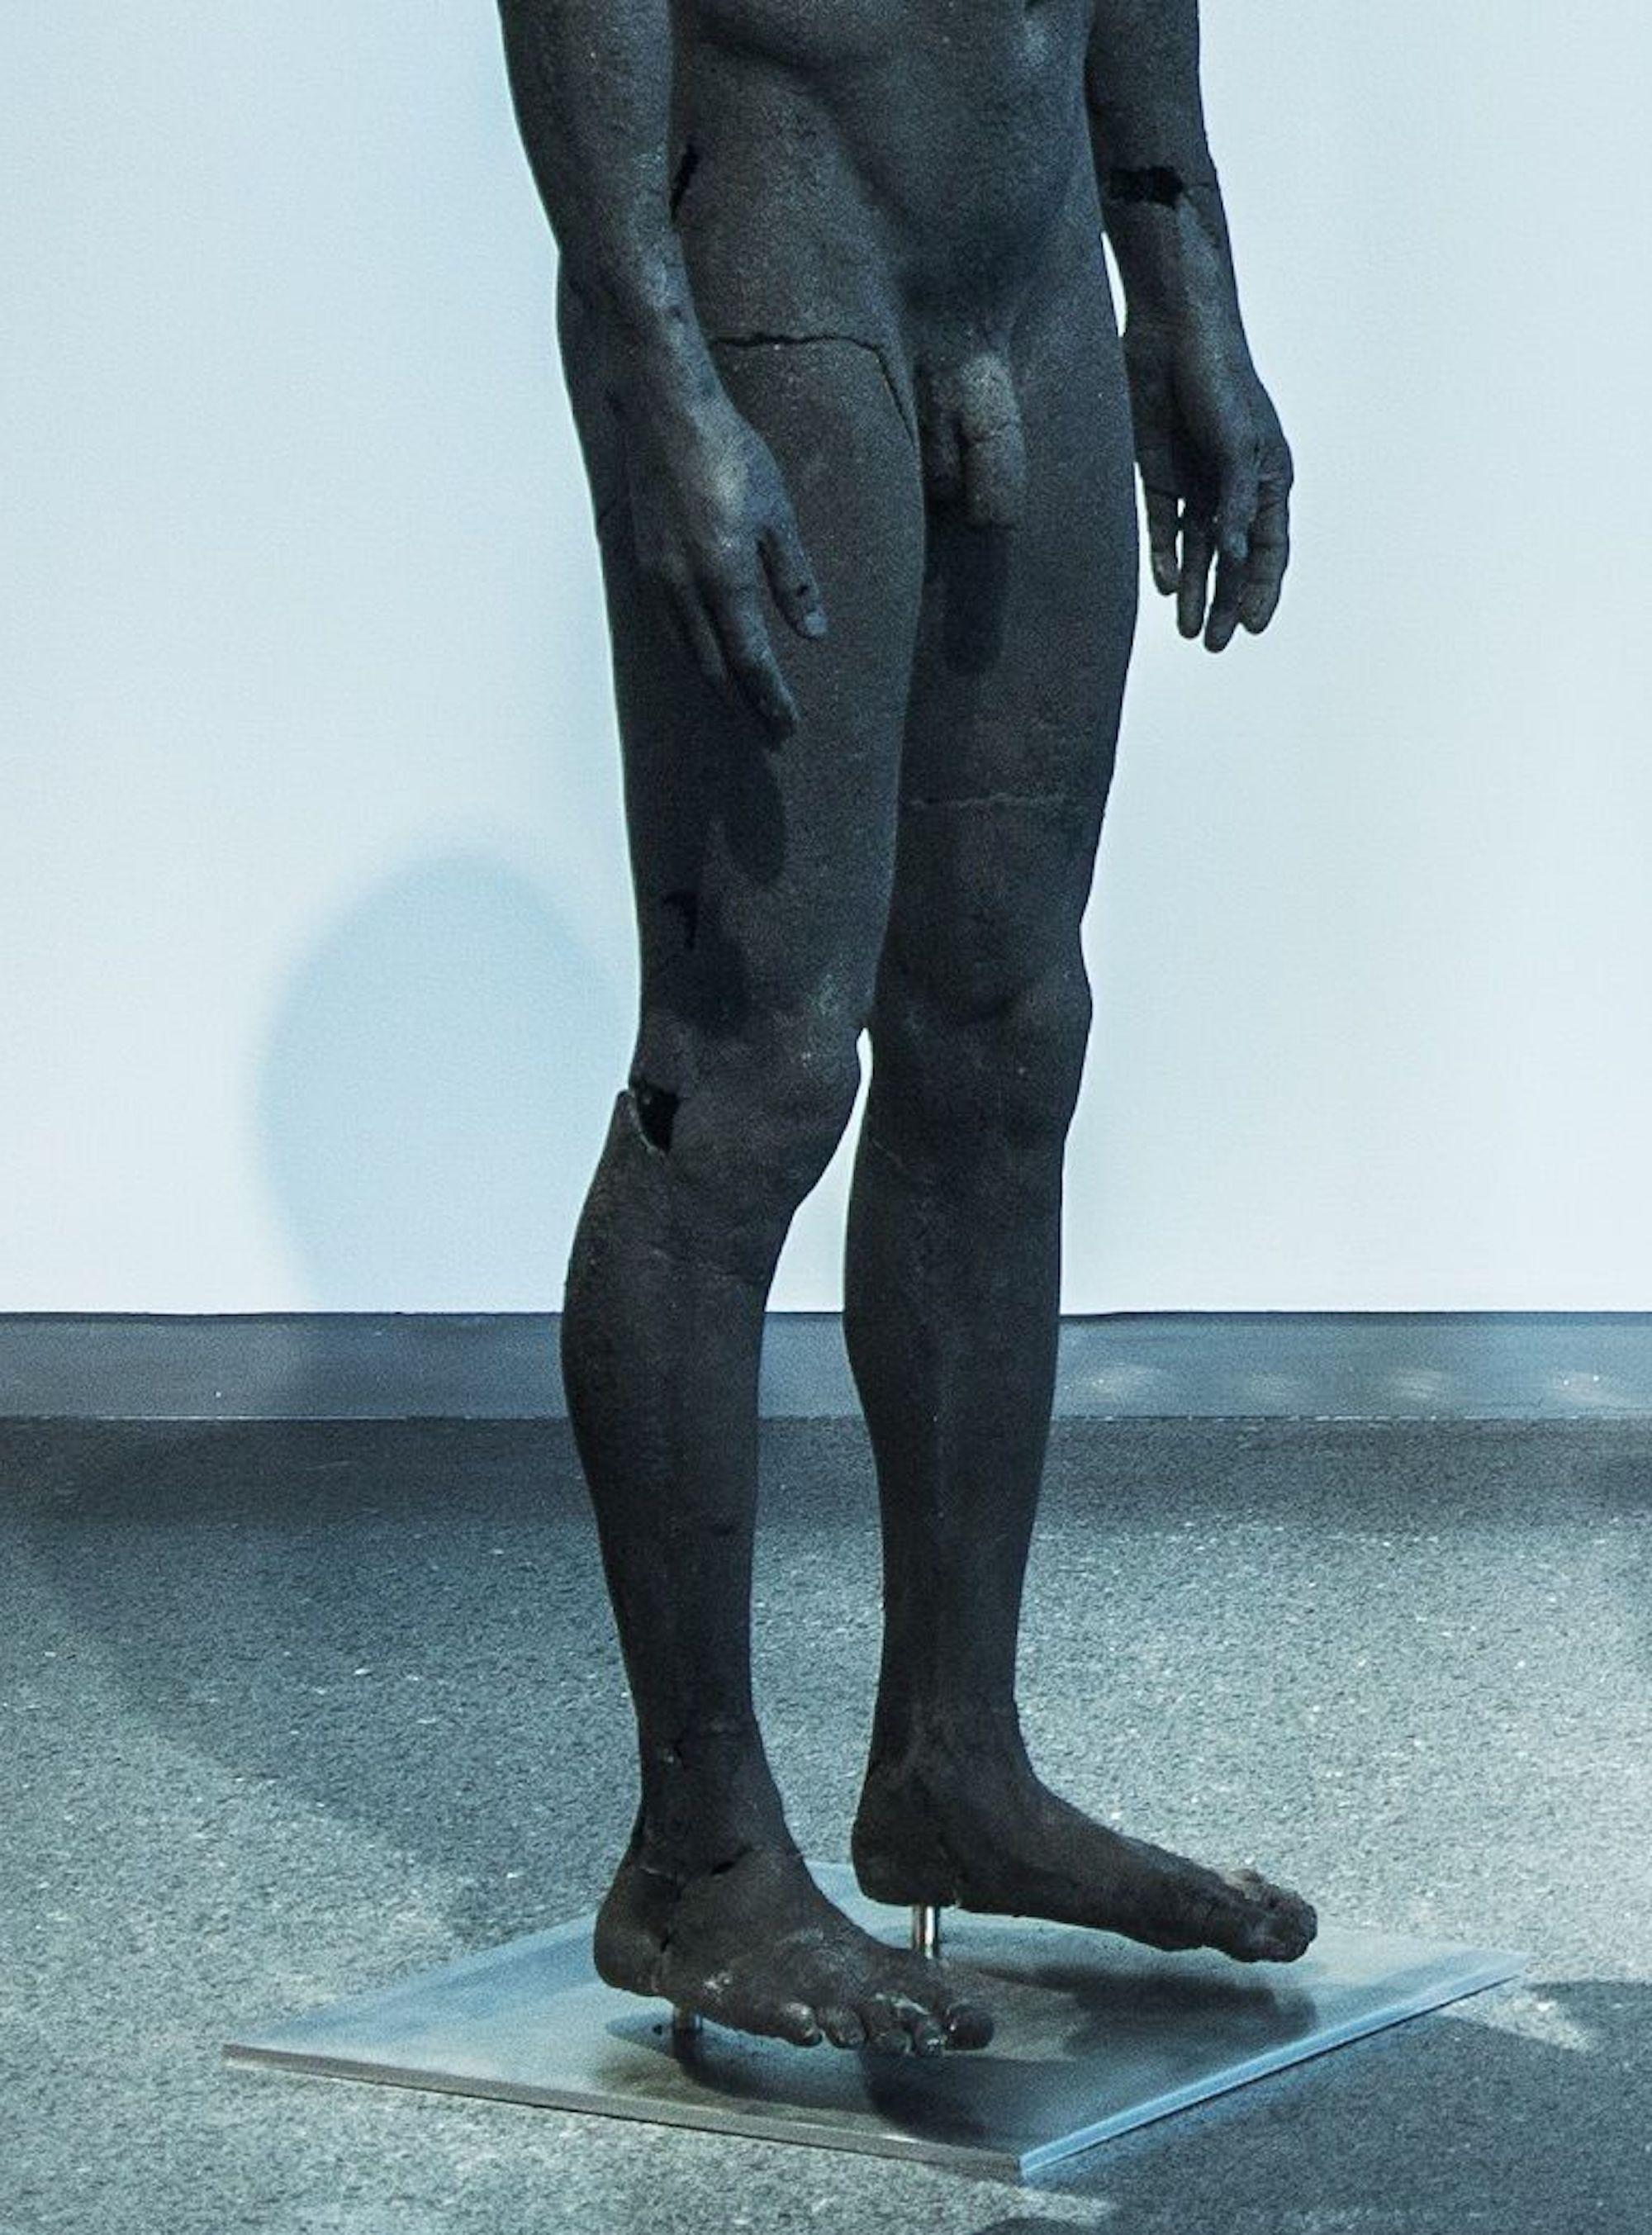 The Presence of Absence – Male (I) by Tom Price - Coal sculpture, nude body For Sale 4